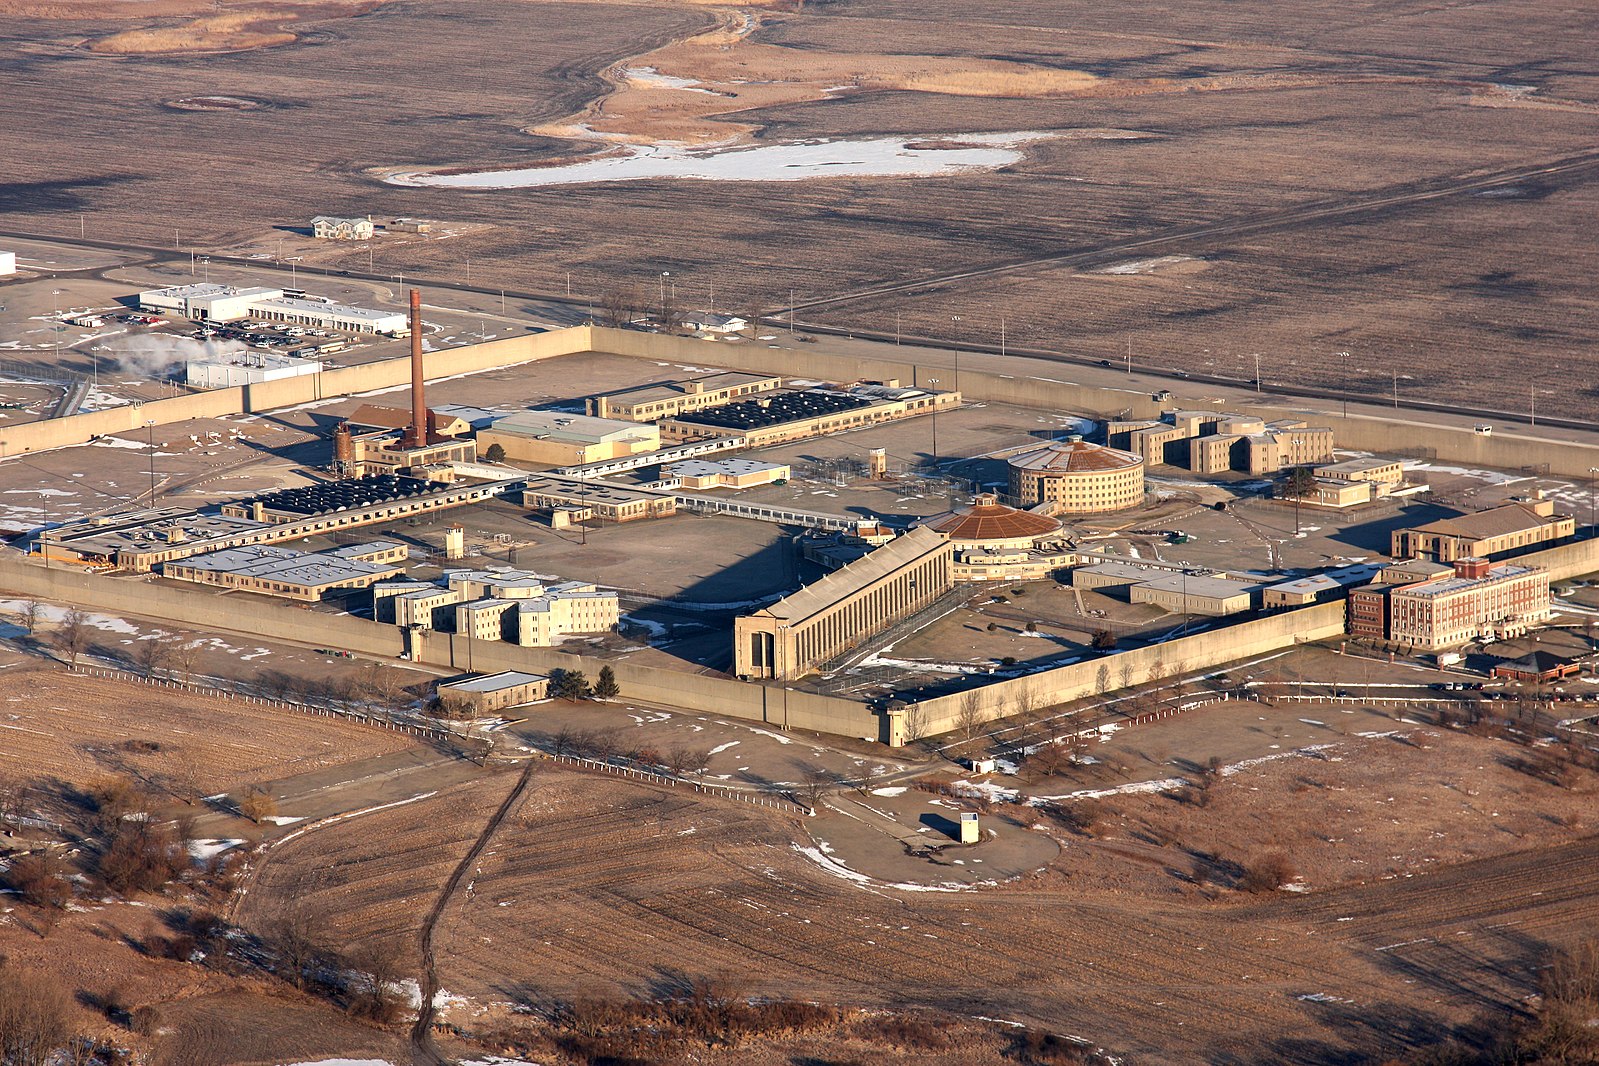   
																Illinois Prison Water Contamination Keeps Getting Worse 
															 